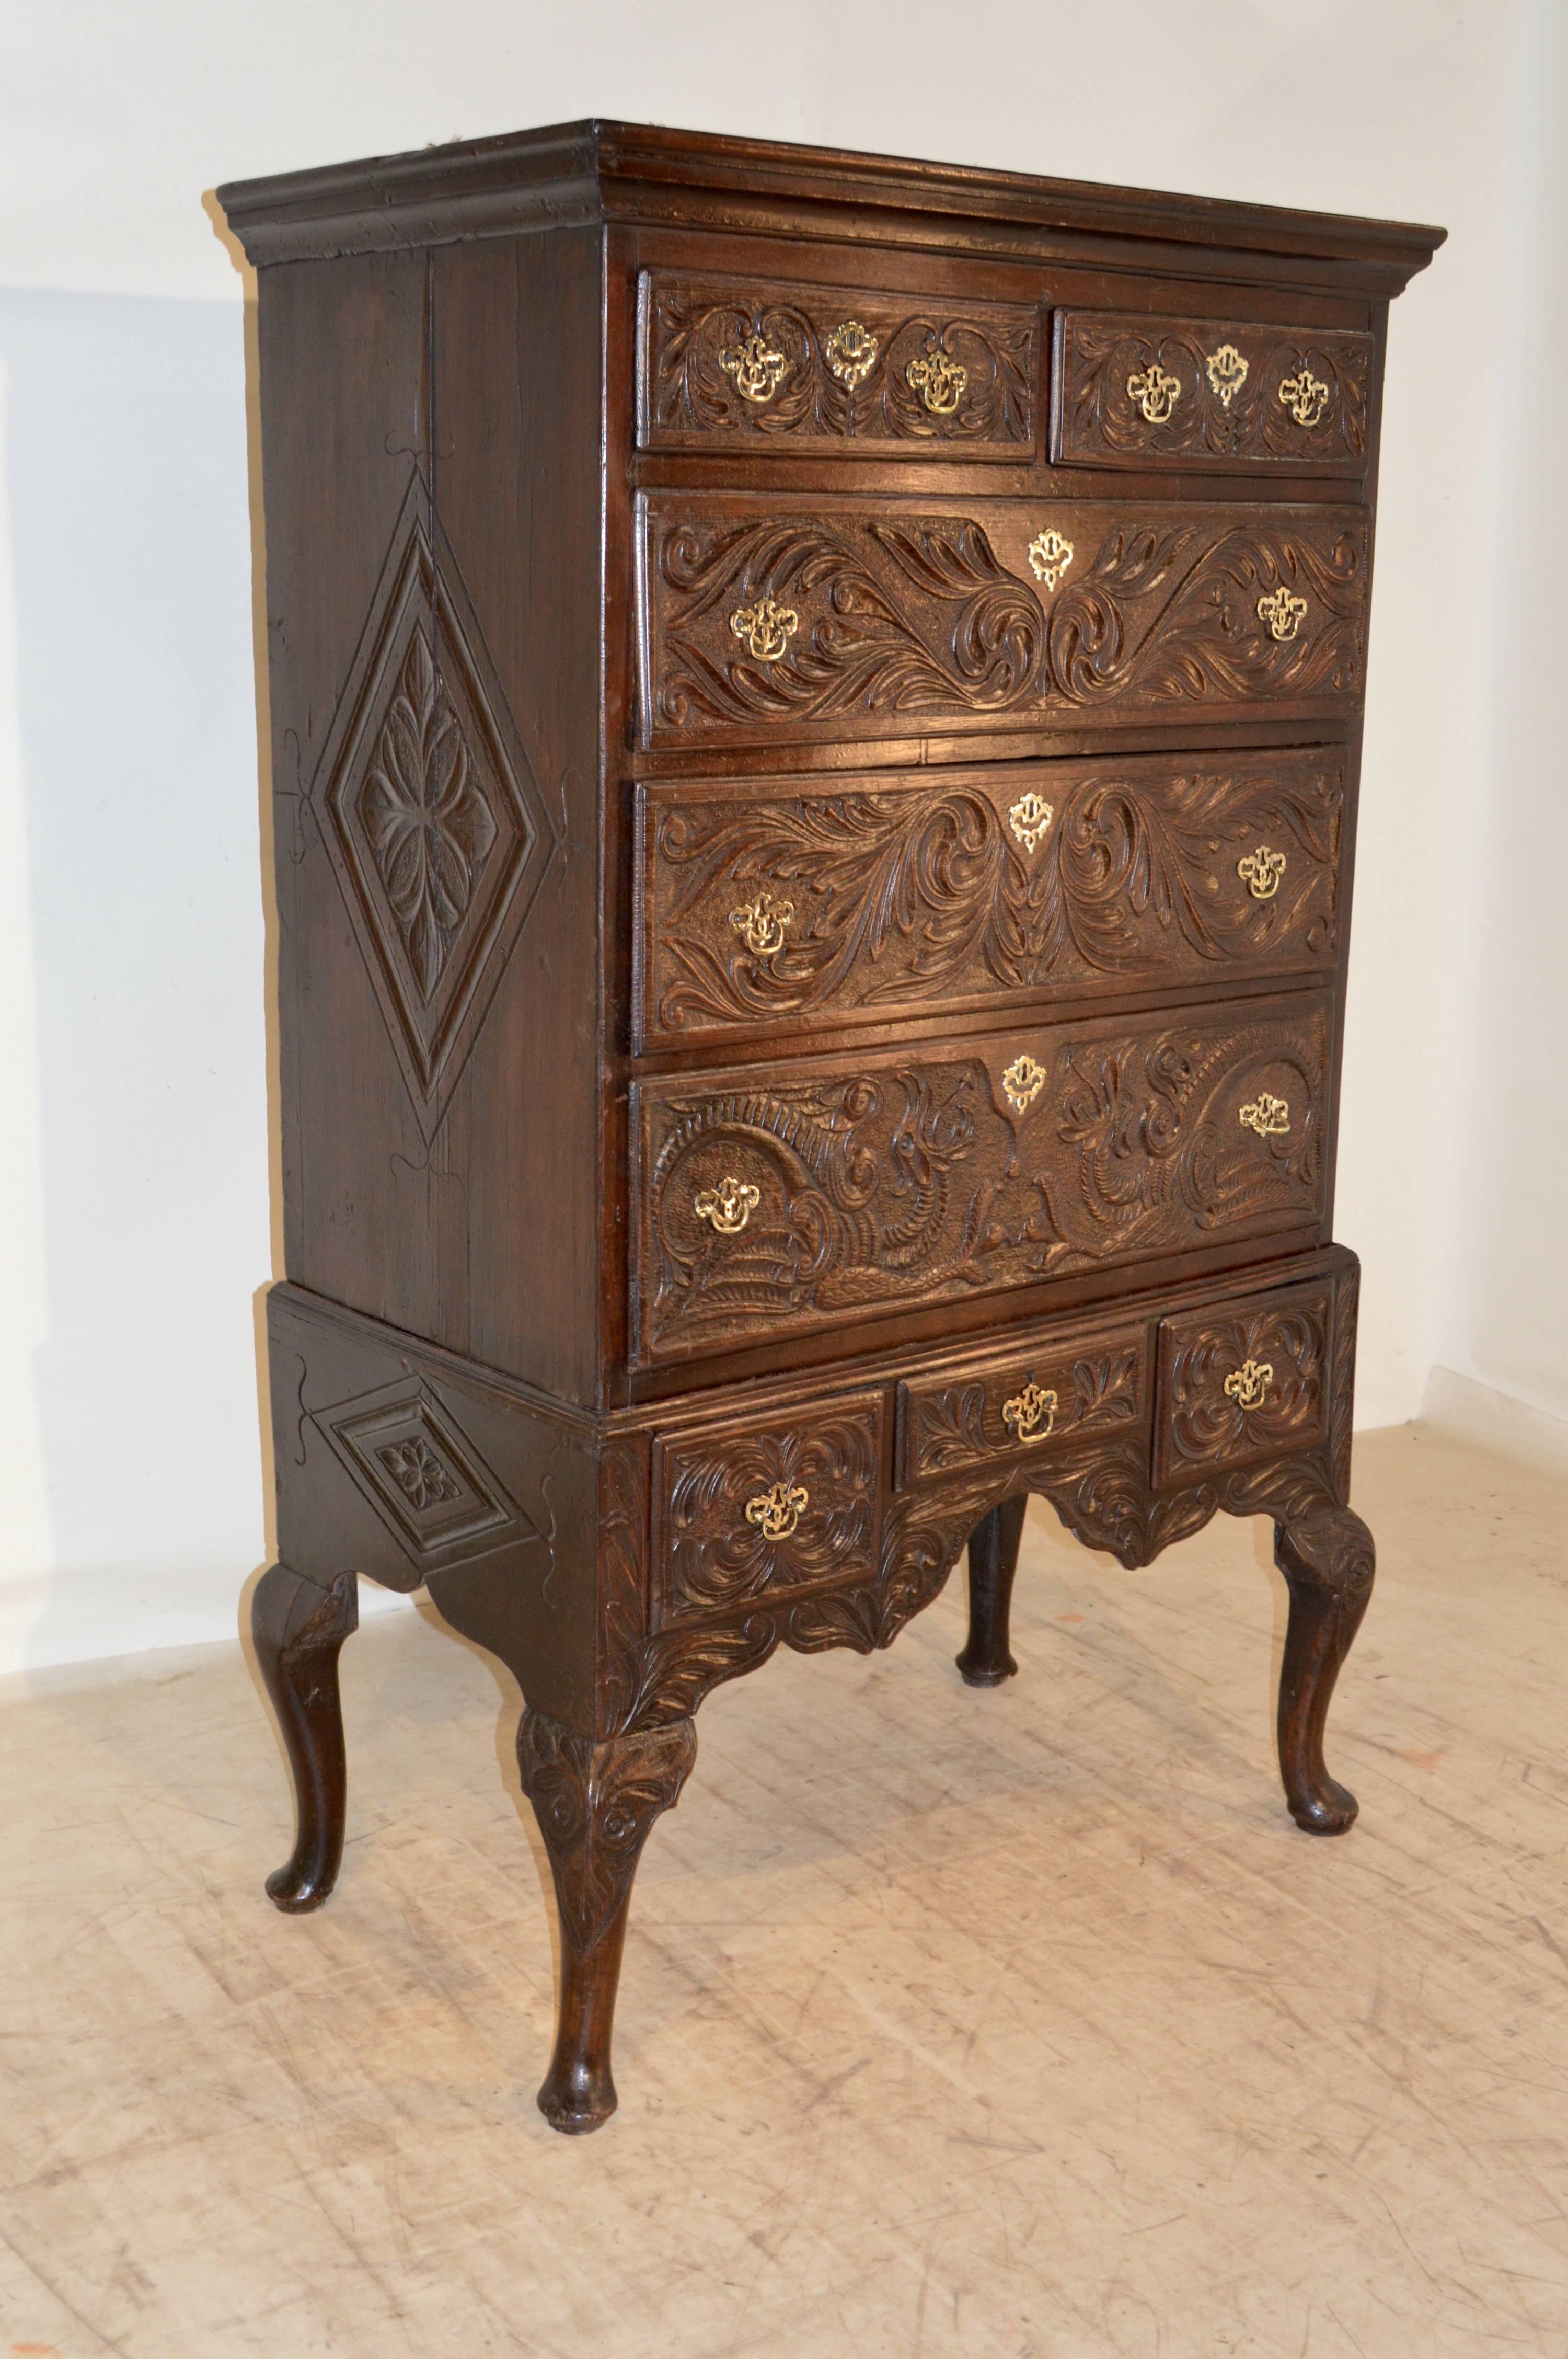 Early 18th century English oak highboy with molded crown around the top, following down to a case with a two over three-drawer configuration, supported on a base with three drawers and hand-turned legs with carved decorated knees, ending in pad